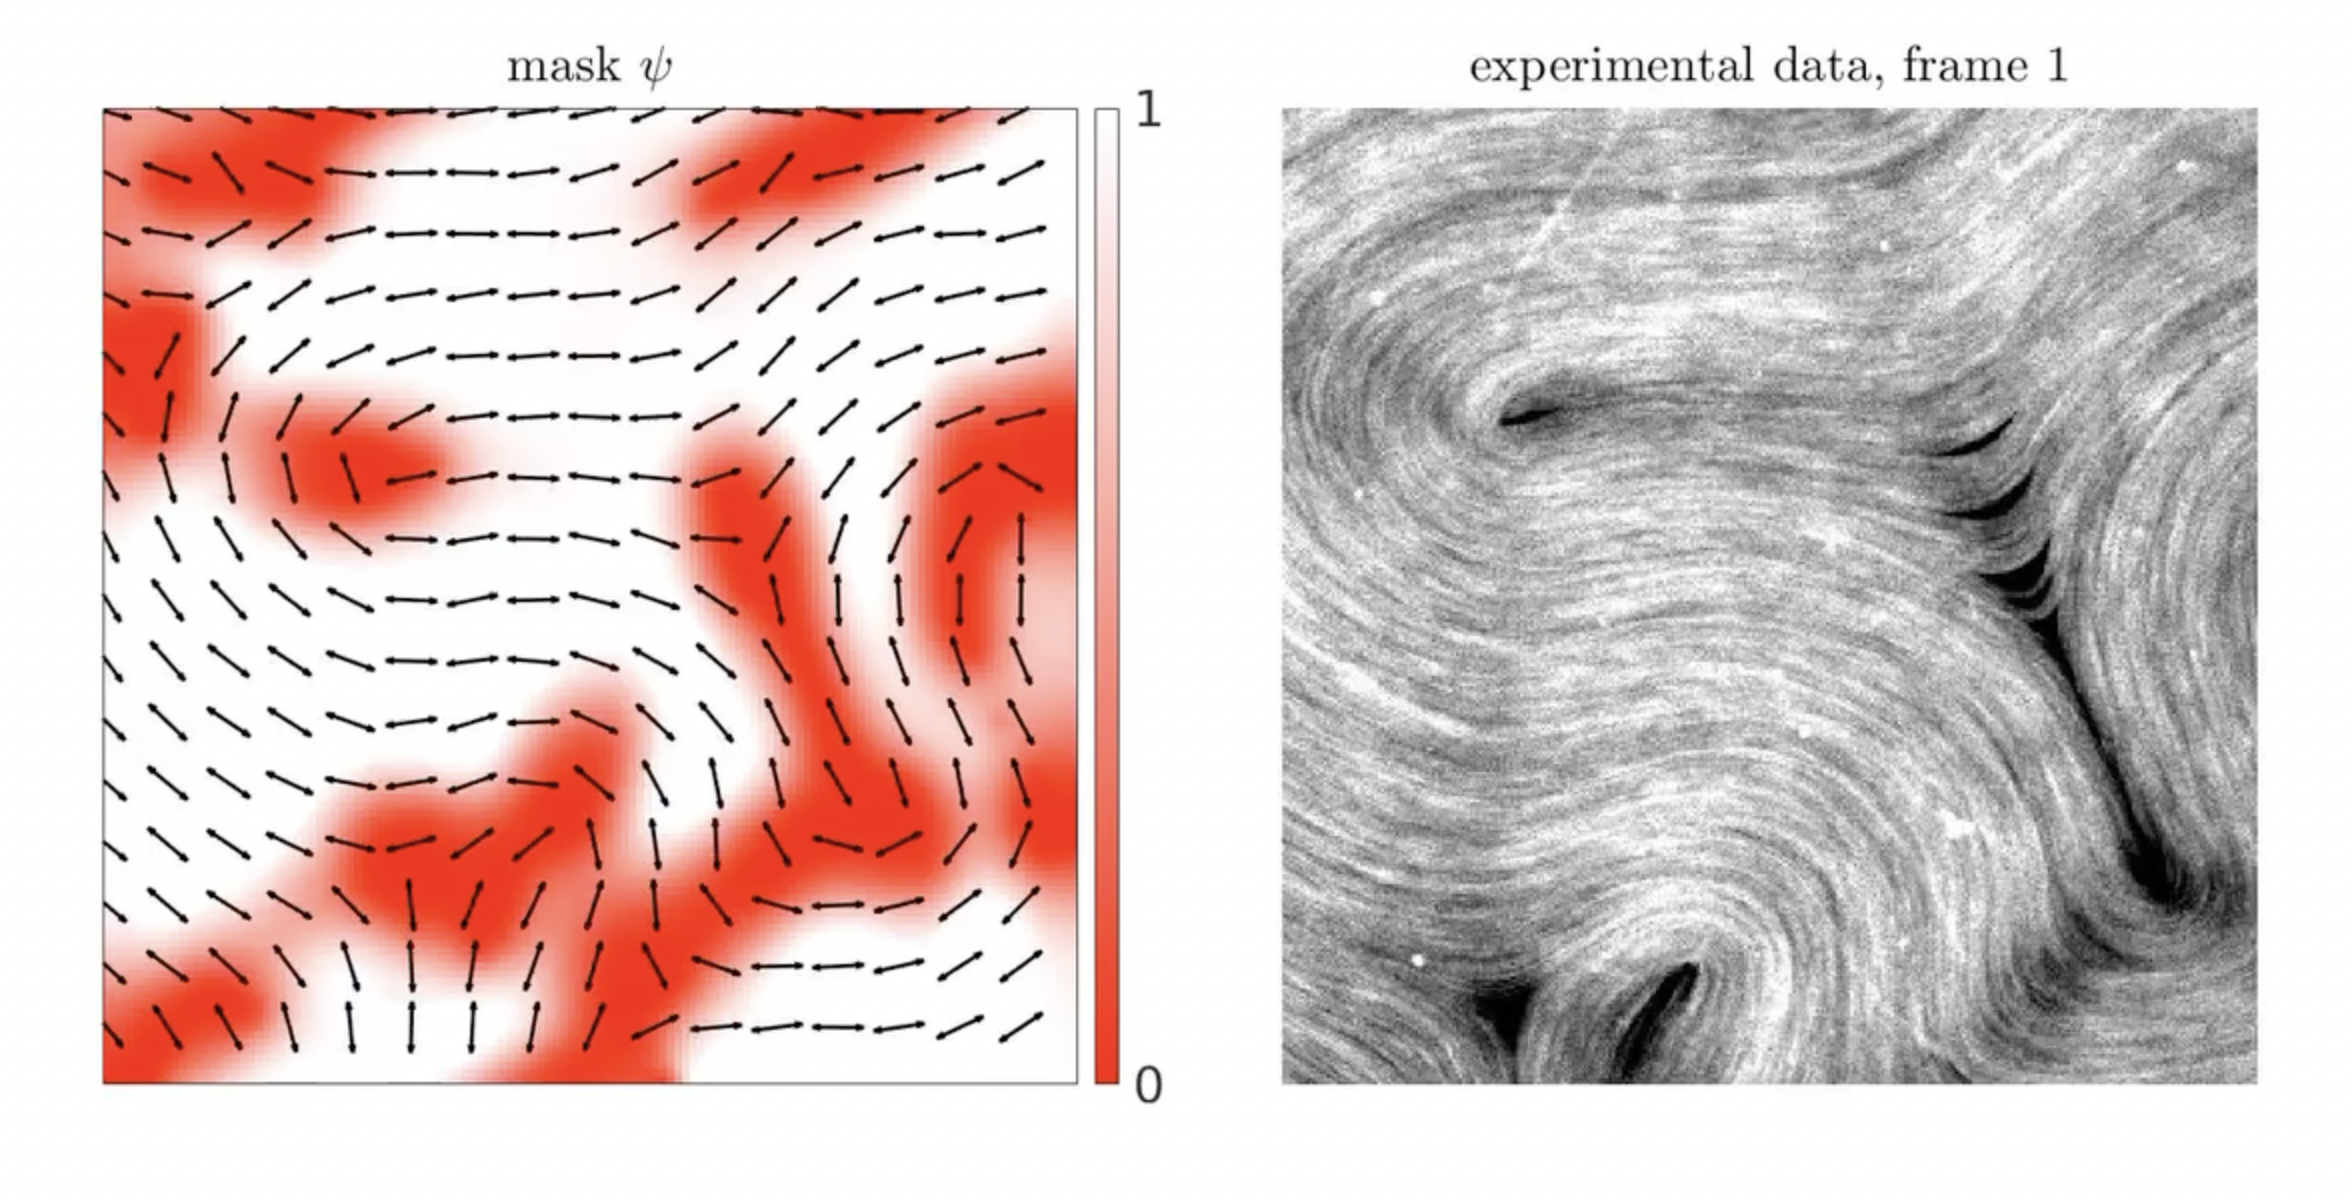 Left, a graphic showing microtubules orienting themselves in the experiment. Right, a still from a video showing microtubules moving at the interface of oil and water. Graphic by Roman Grigoriev